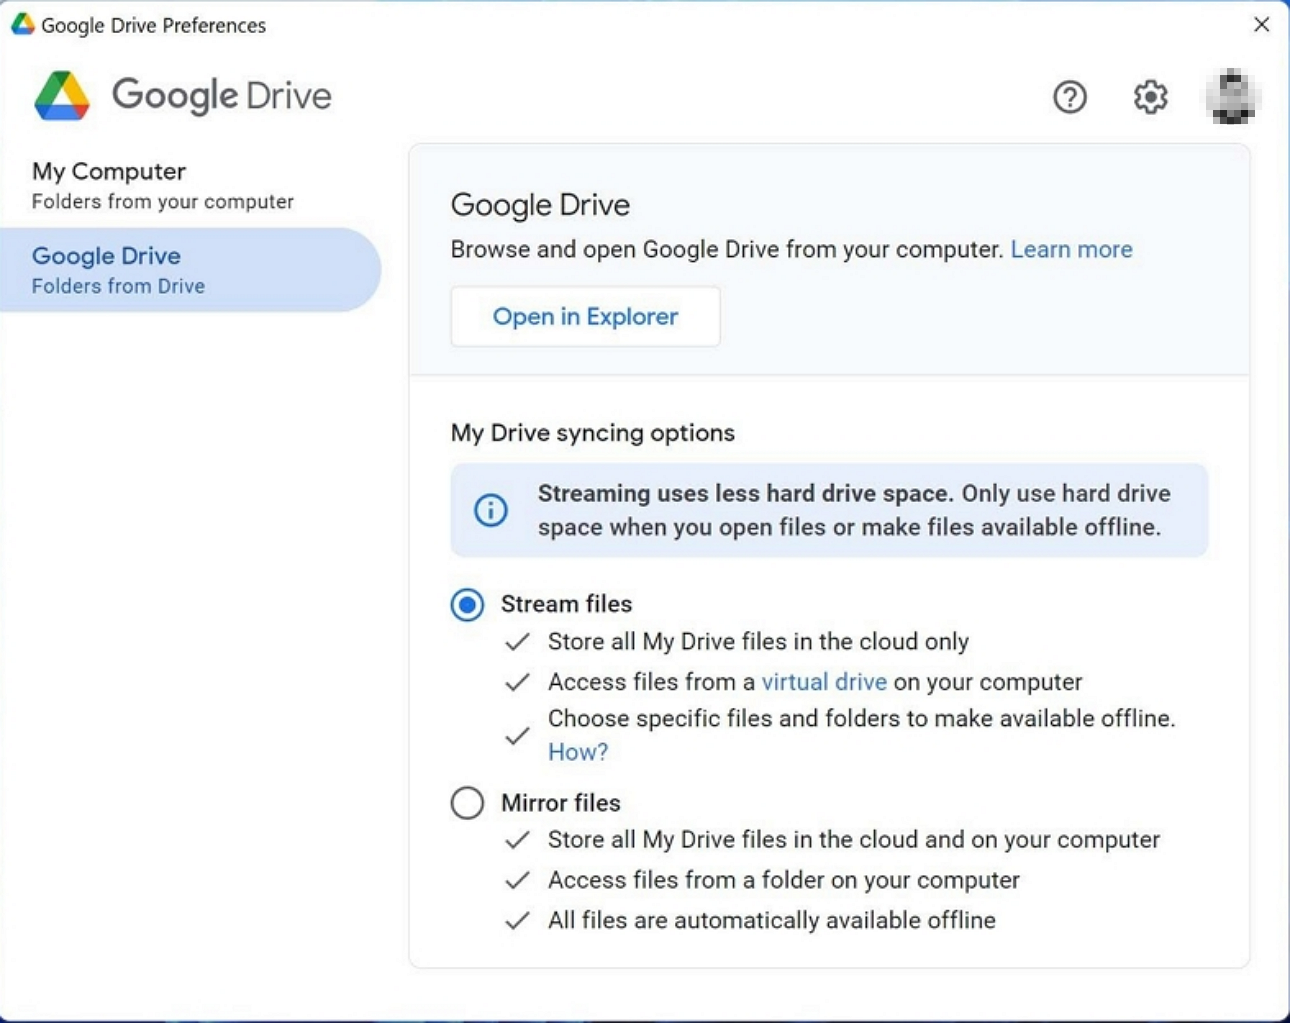 How do I open Google Drive Backup on my computer?